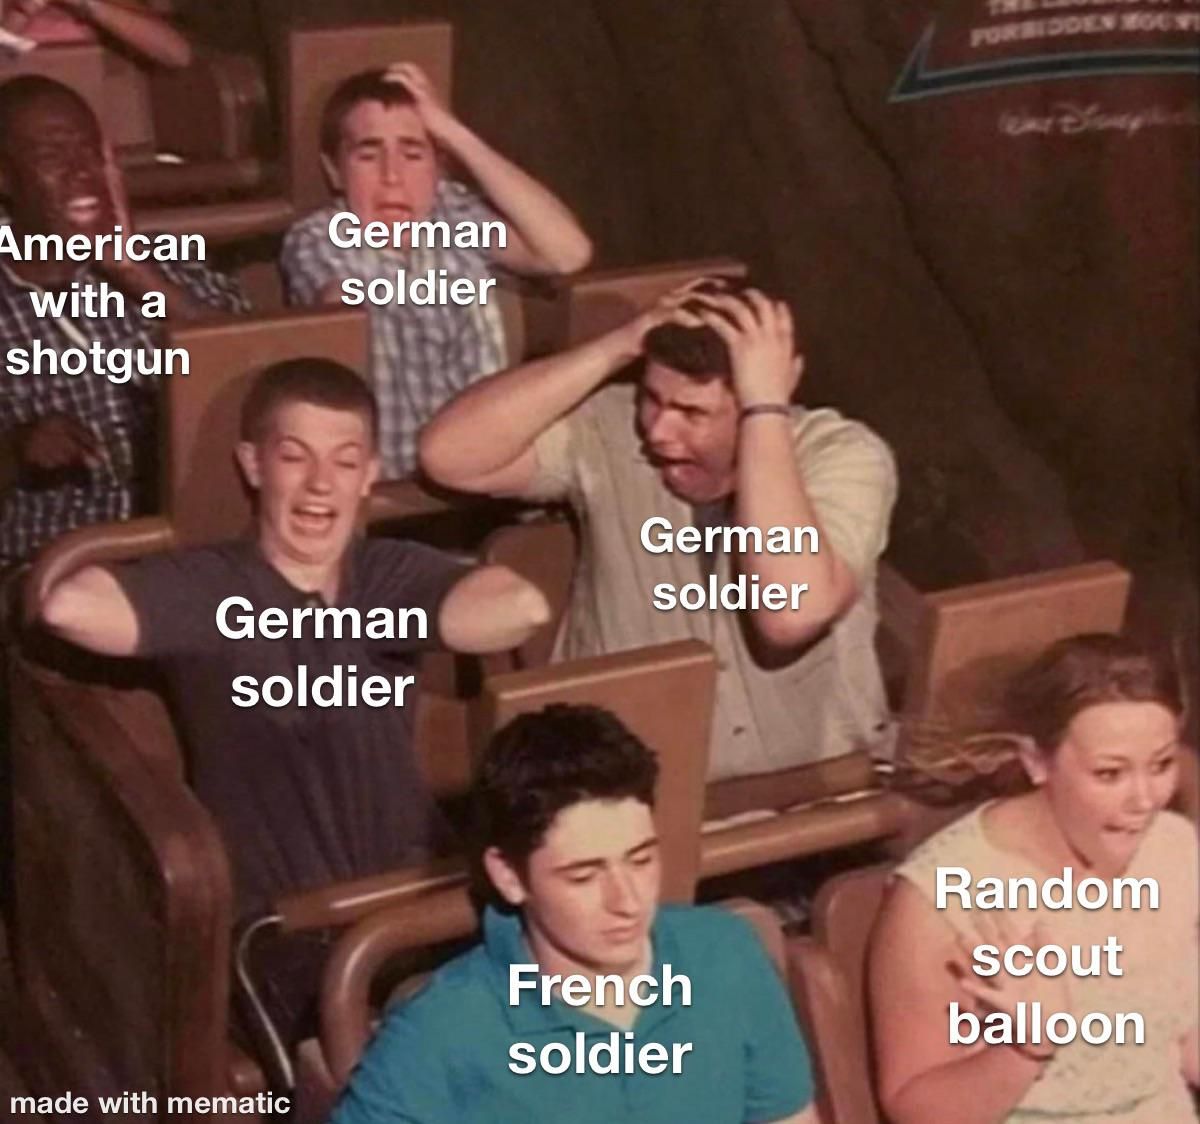 The western front during WW1 was pretty brutal